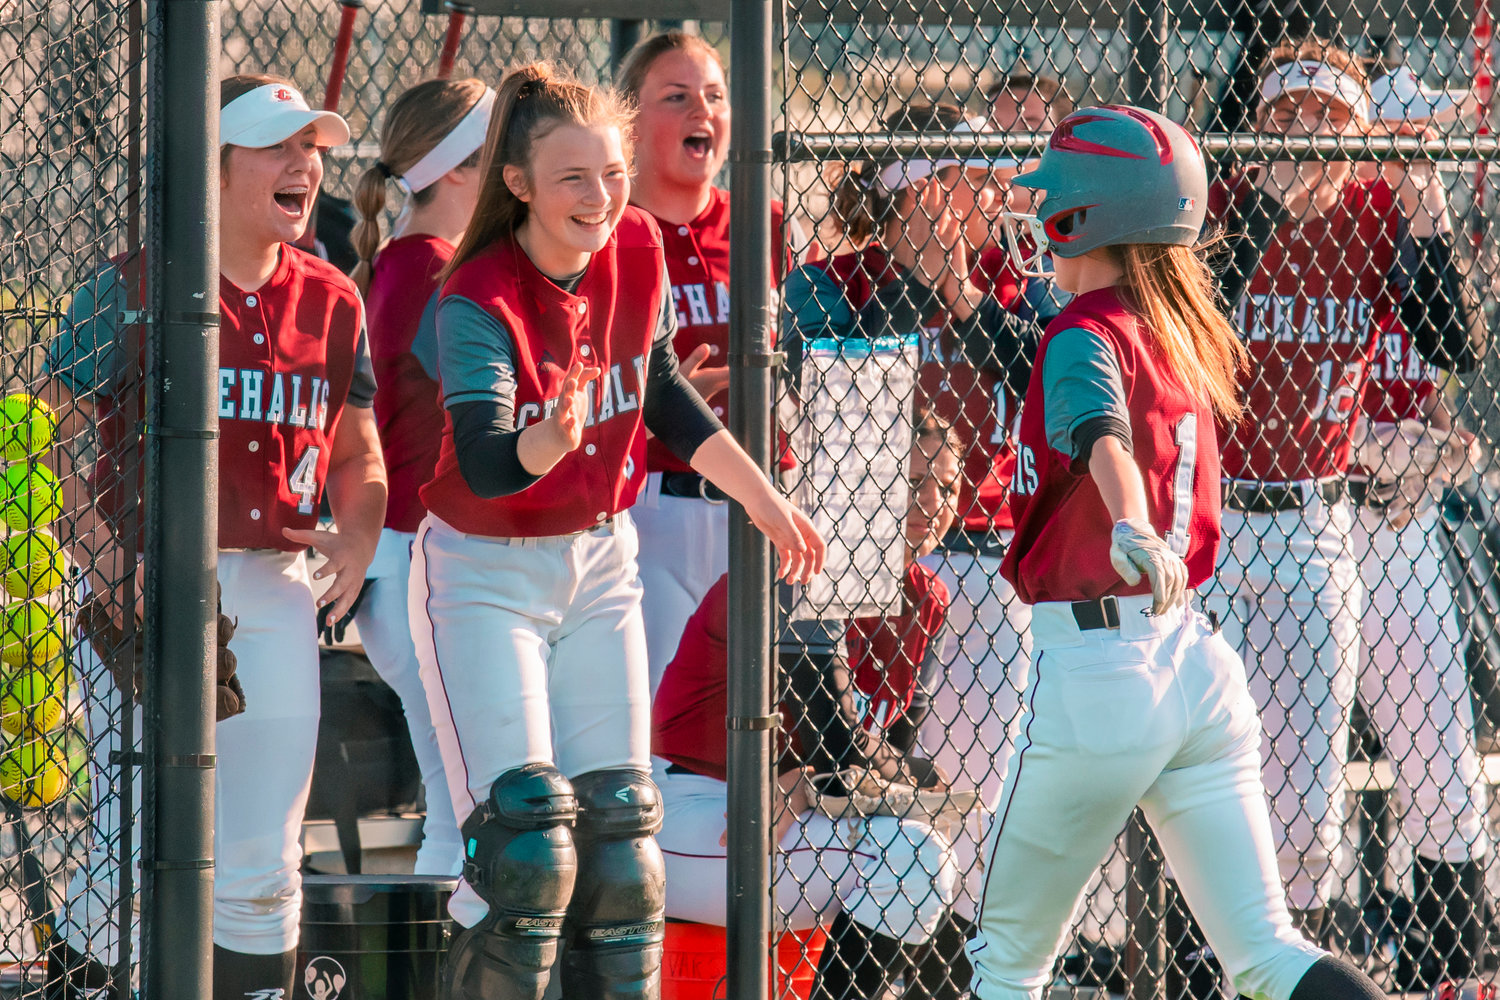 Bearcats celebrate a score as Brielle Etter (1) returns to the dugout during a game against Shelton, Tuesday afternoon in Chehalis.